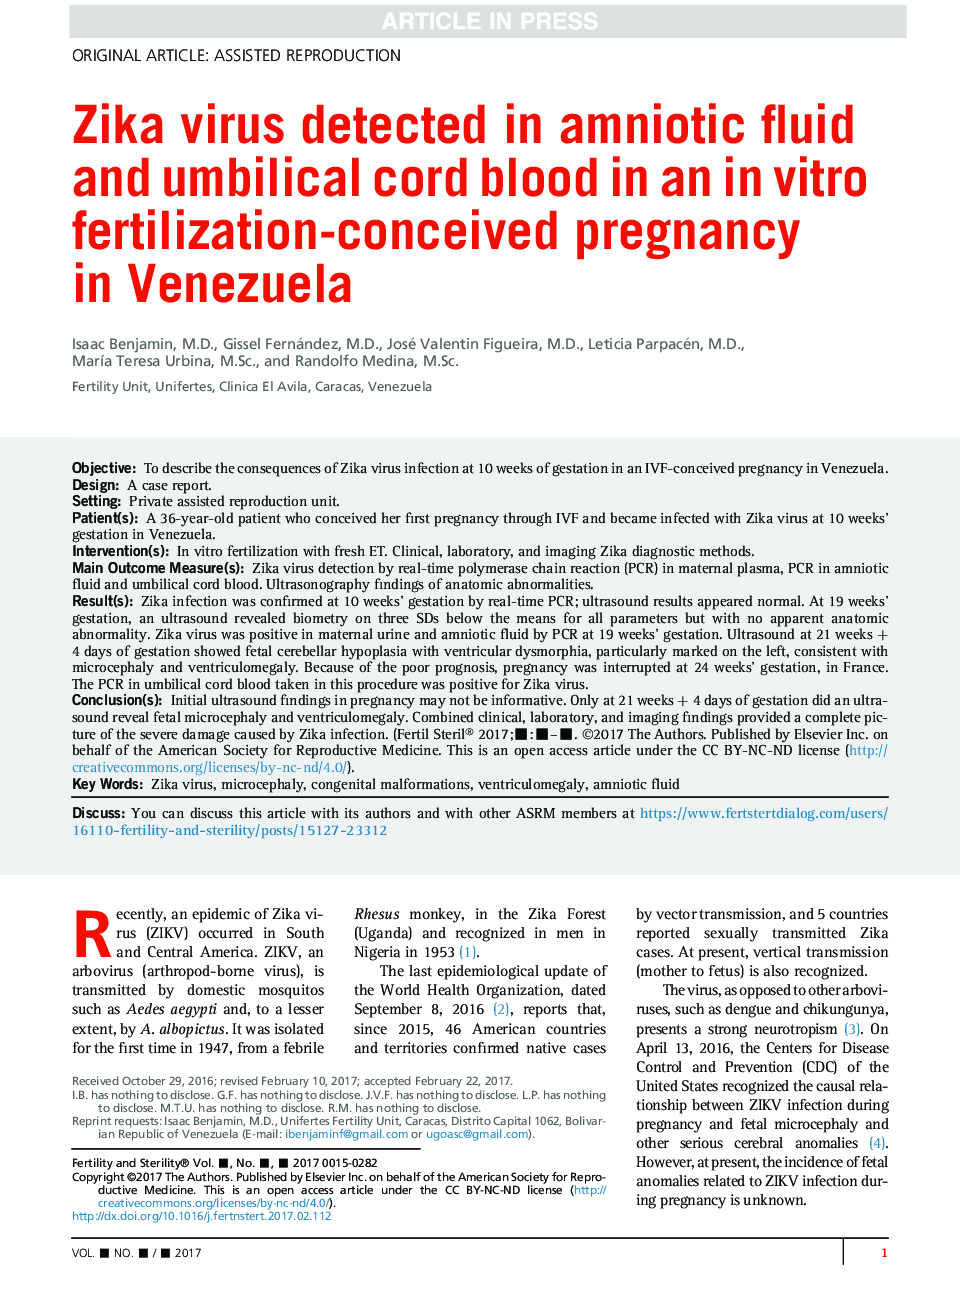 Zika virus detected in amniotic fluid and umbilical cord blood in an inÂ vitro fertilization-conceived pregnancy in Venezuela